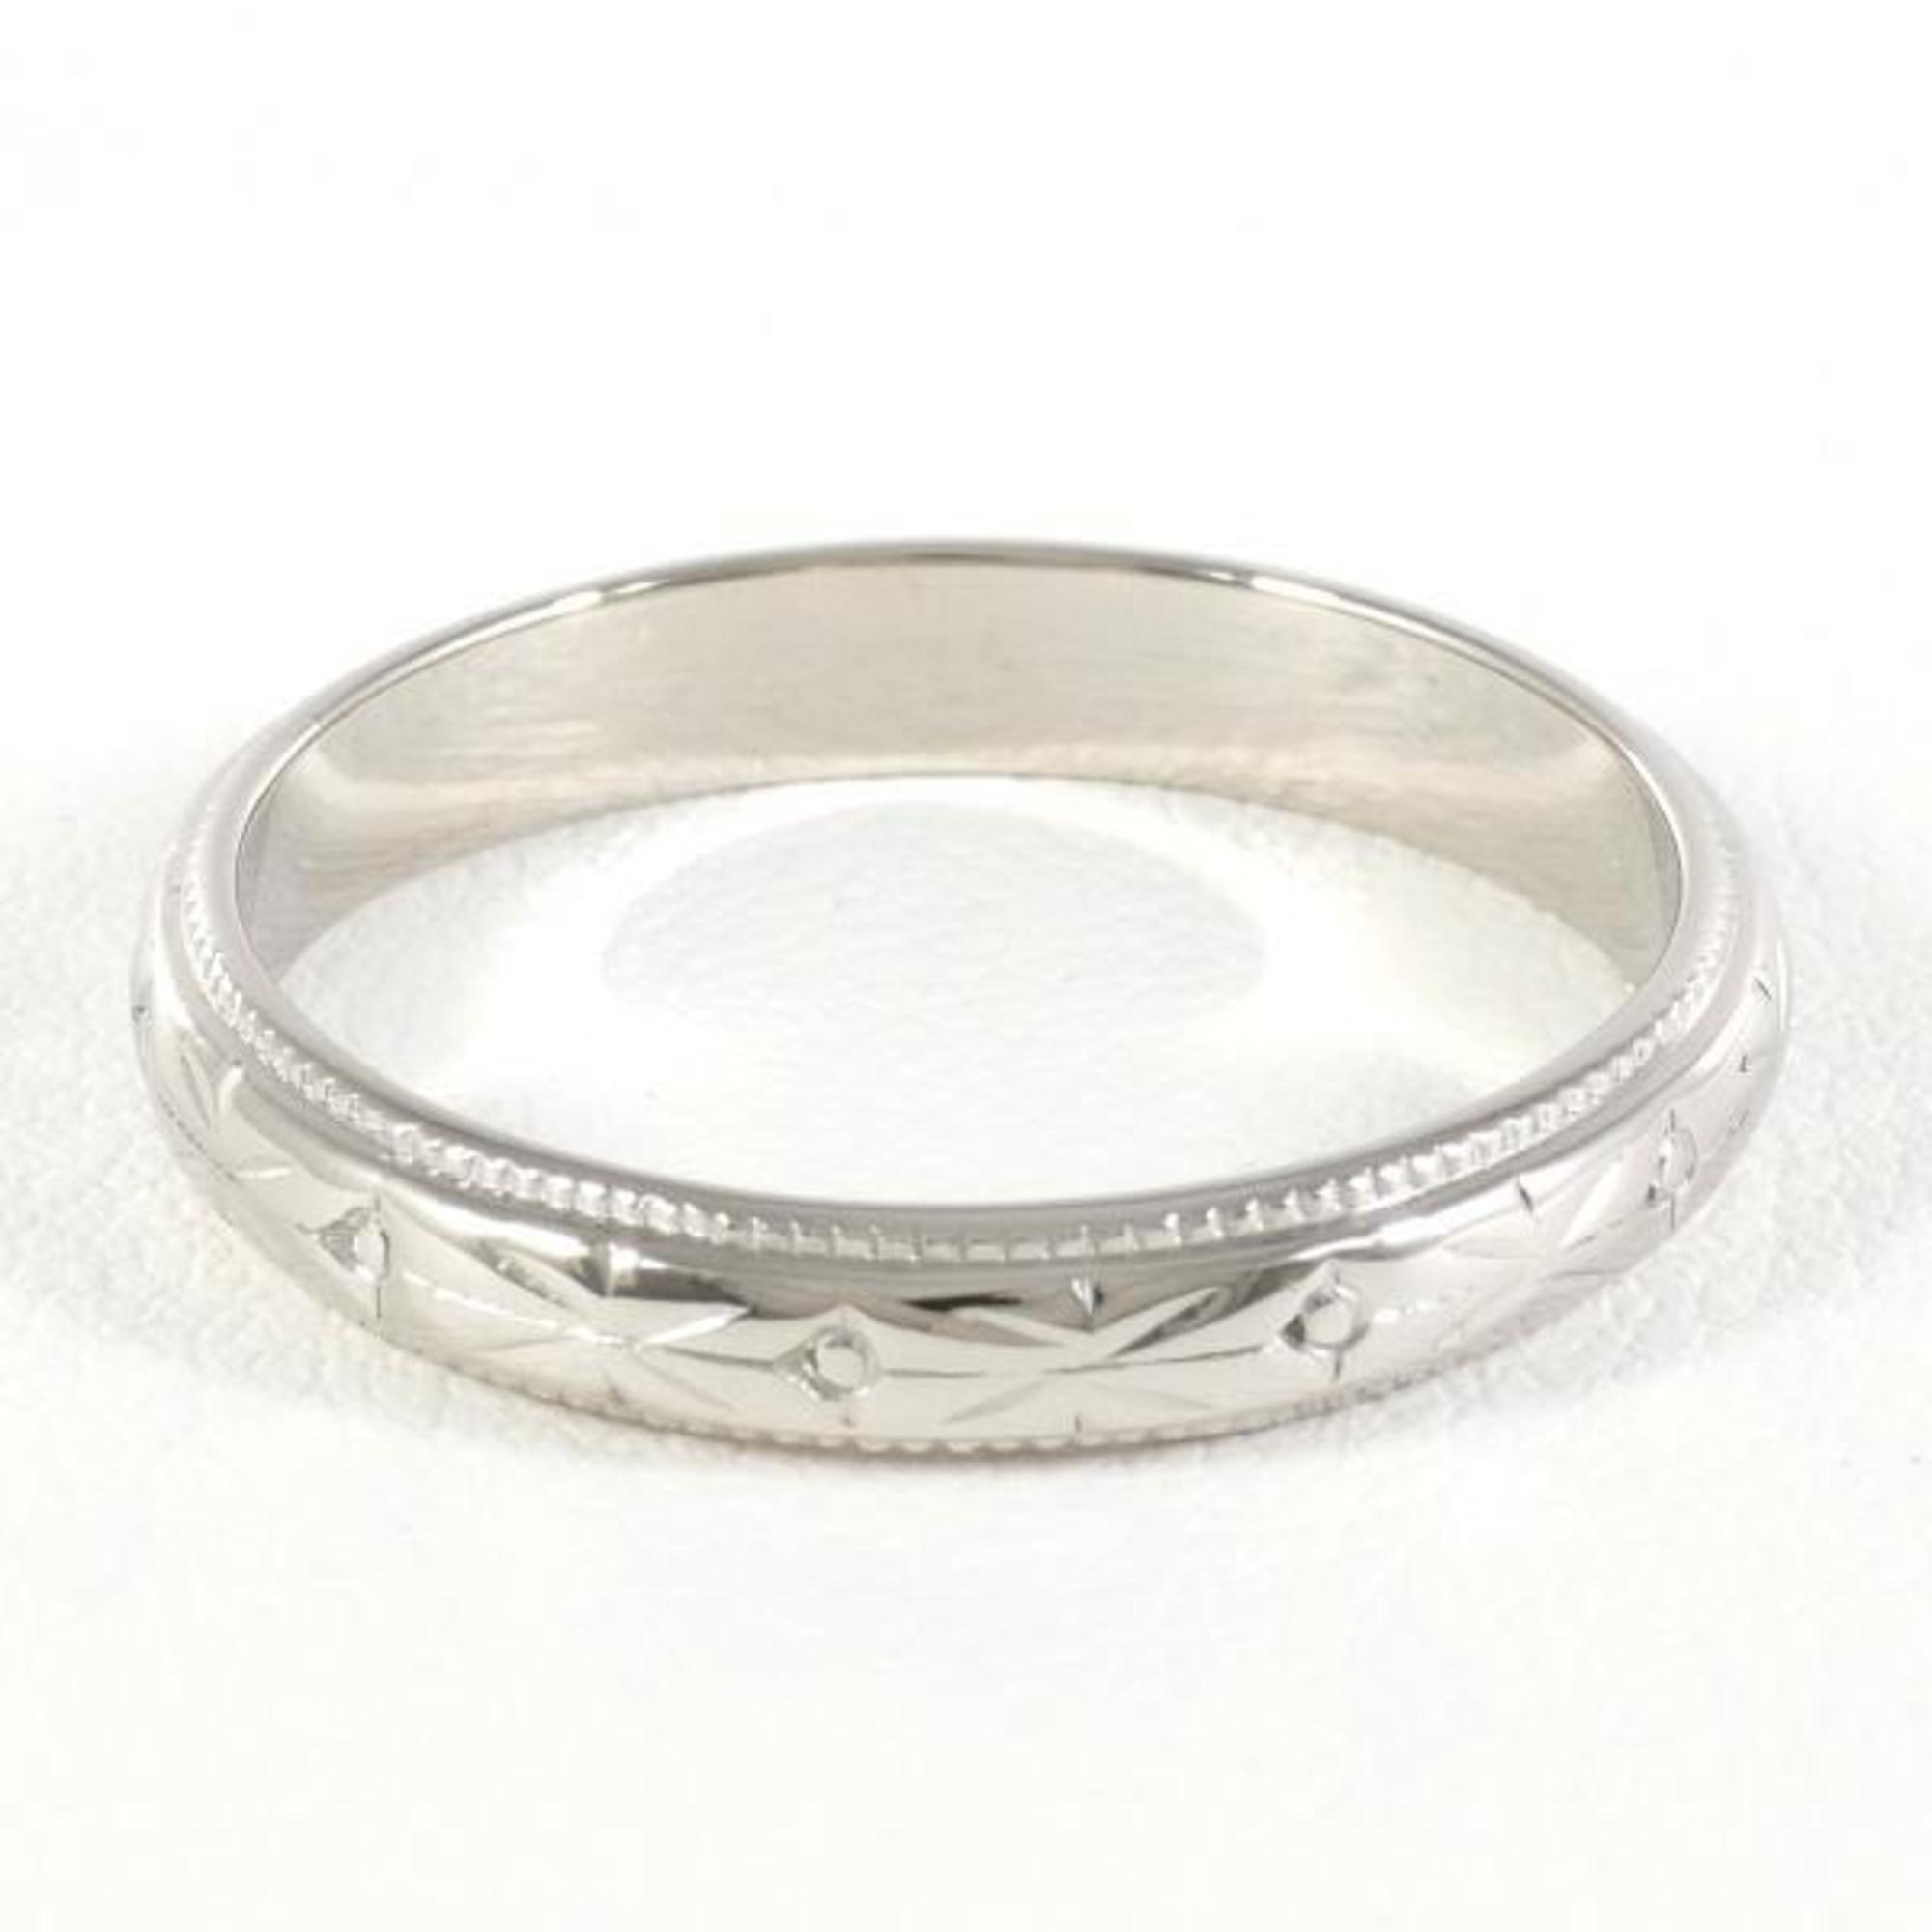 Seiko Jewelry PT900 Ring No. 12 Total Weight Approx. 3.6g